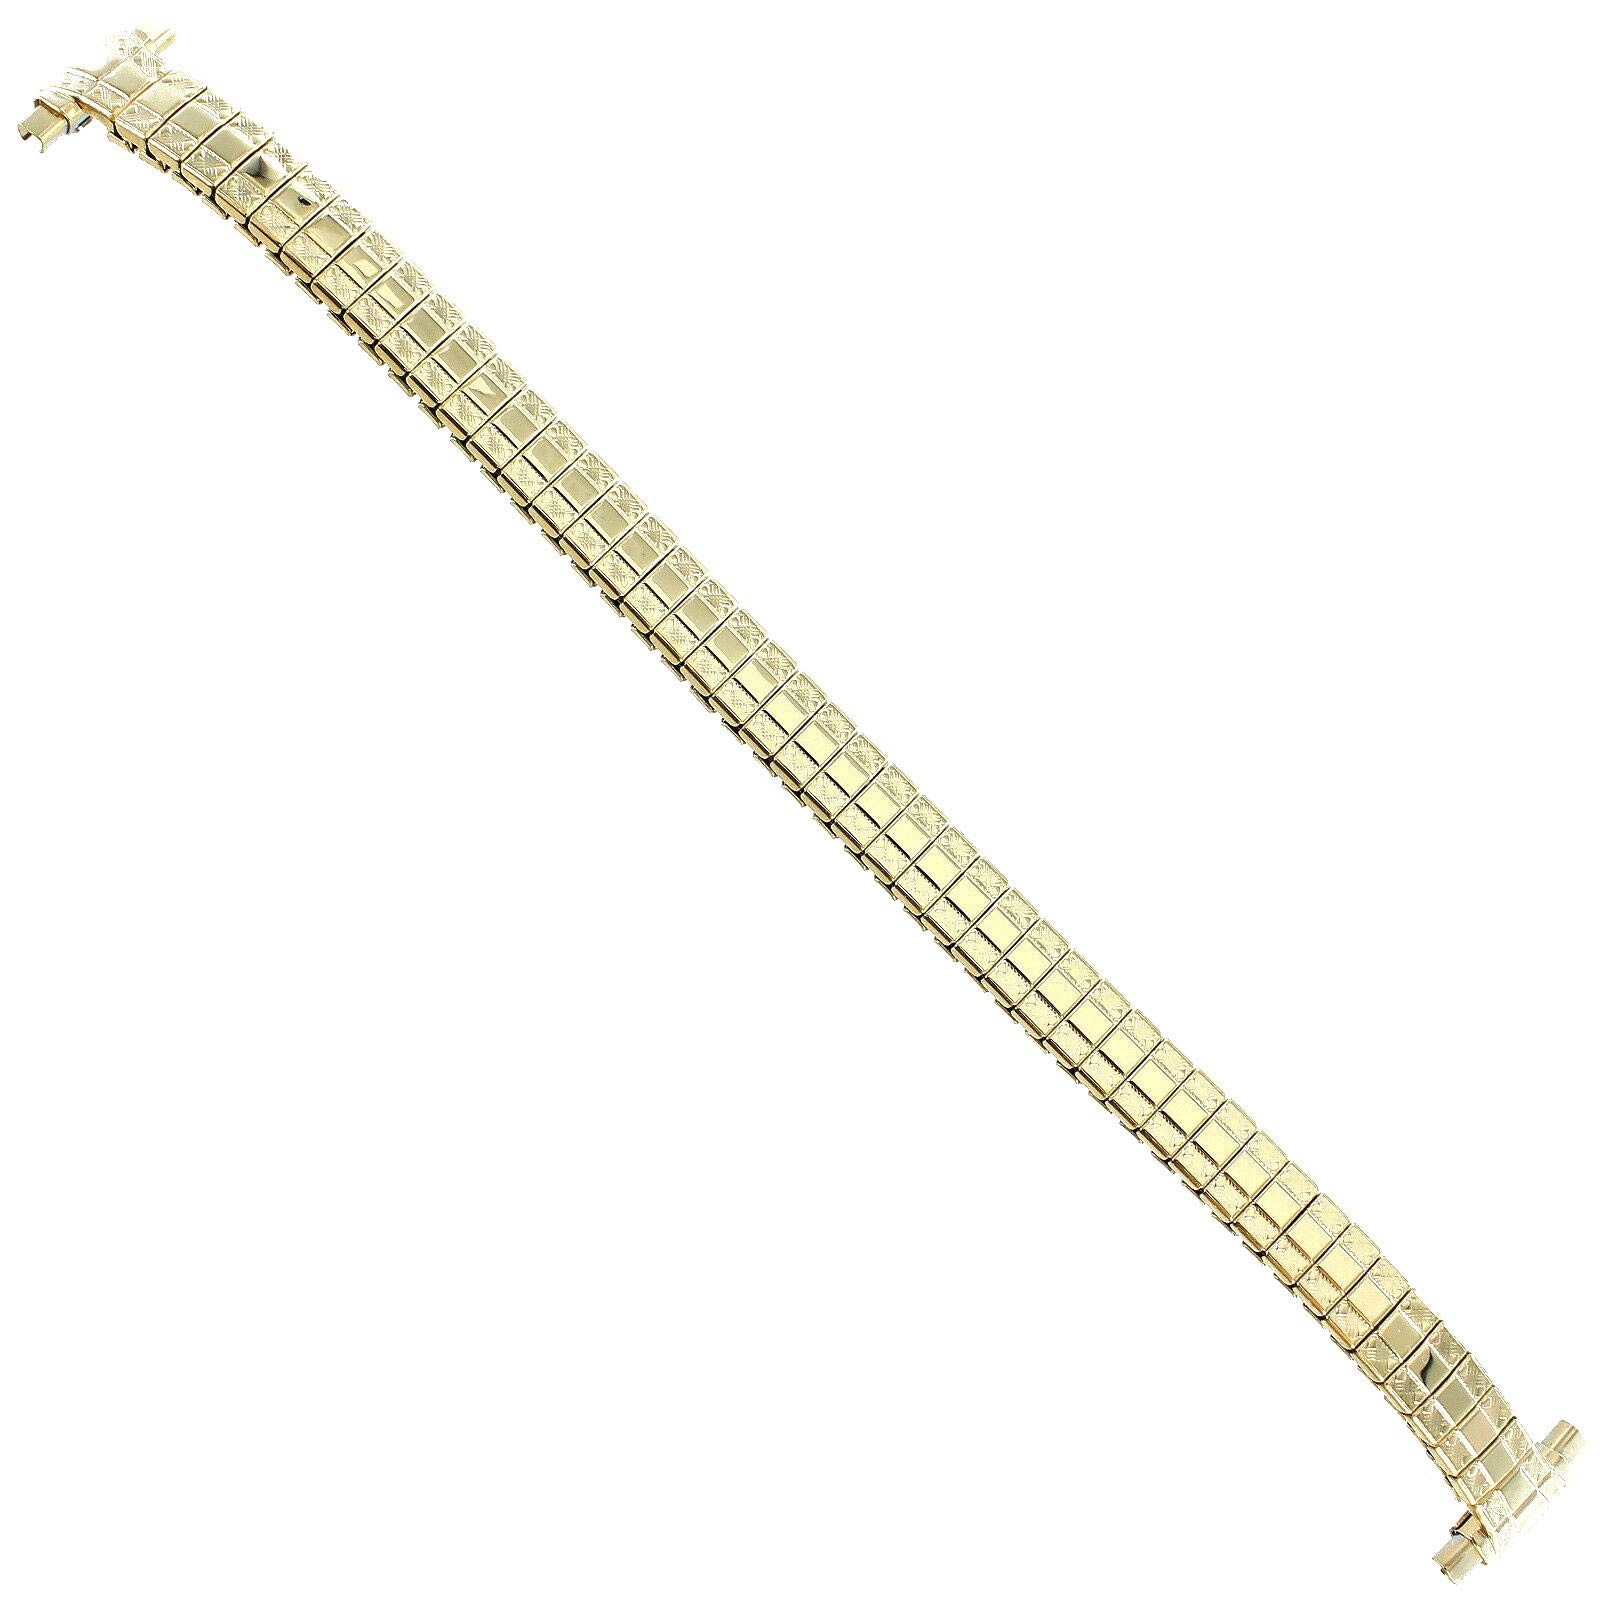 10-14mm Speidel Gold Stainless Steel Ladies Expansion Watch Band 741/32